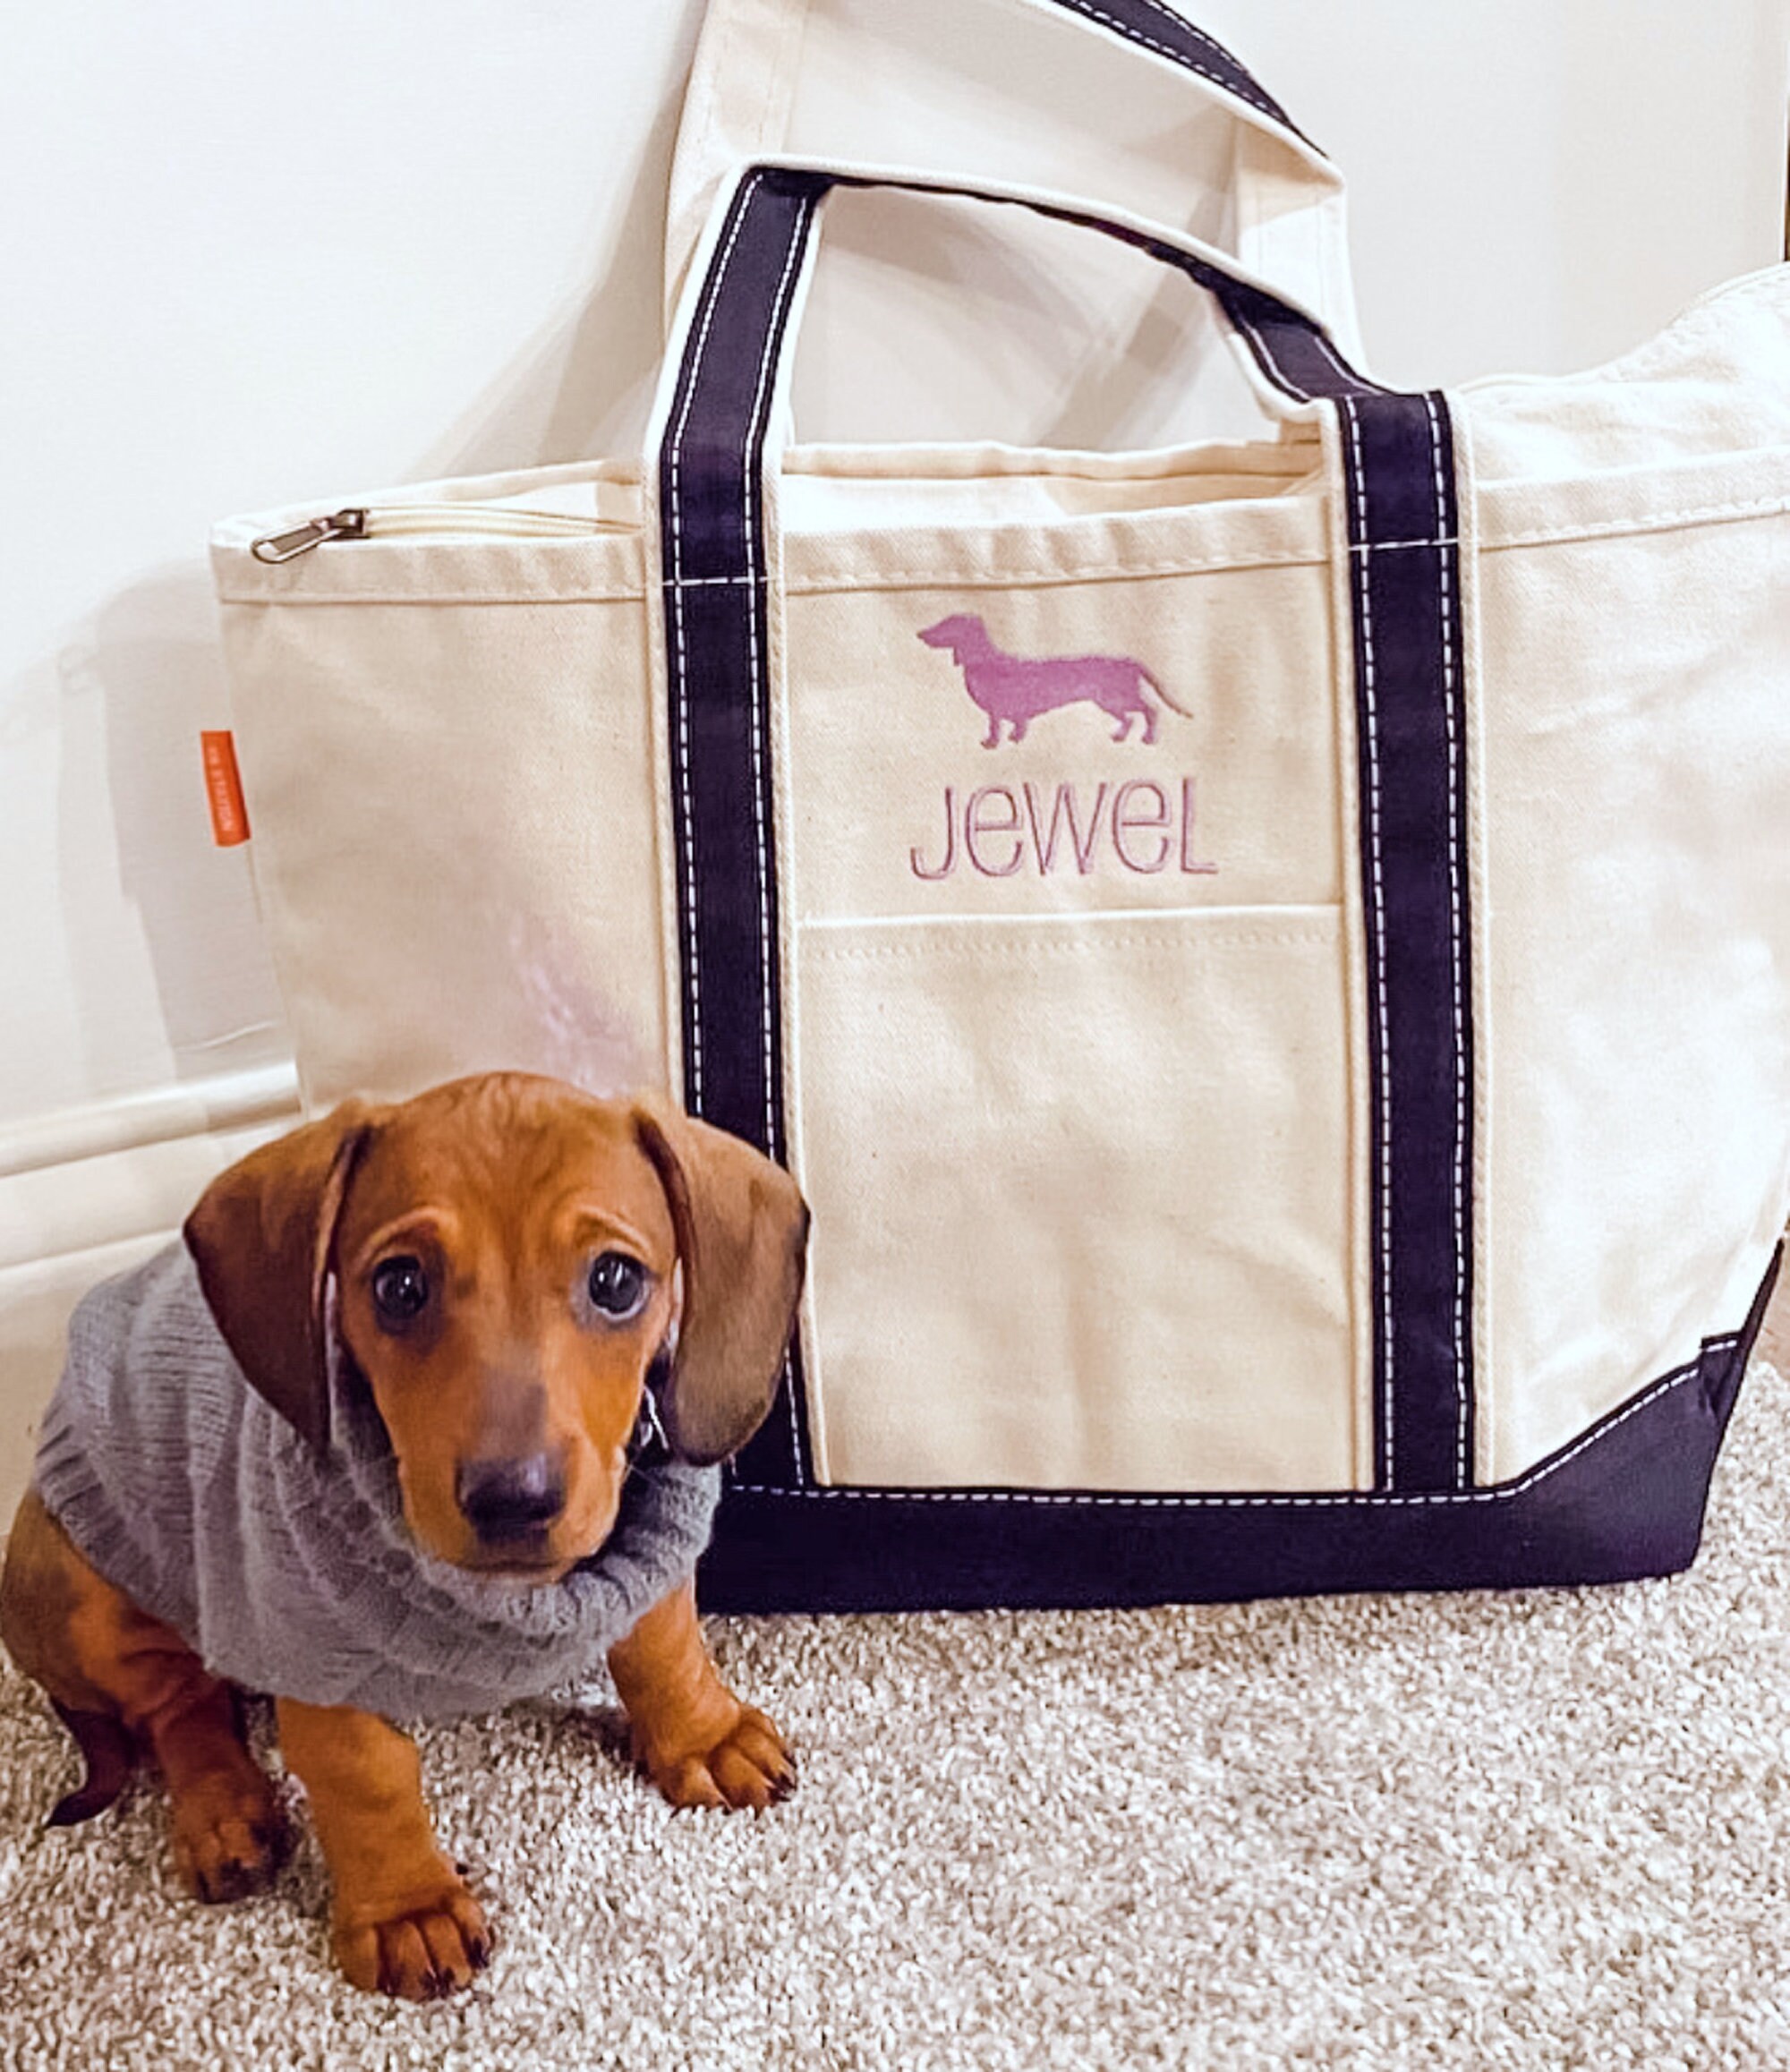 Fetching Finds: Lands End Carry Bag for Dachshunds